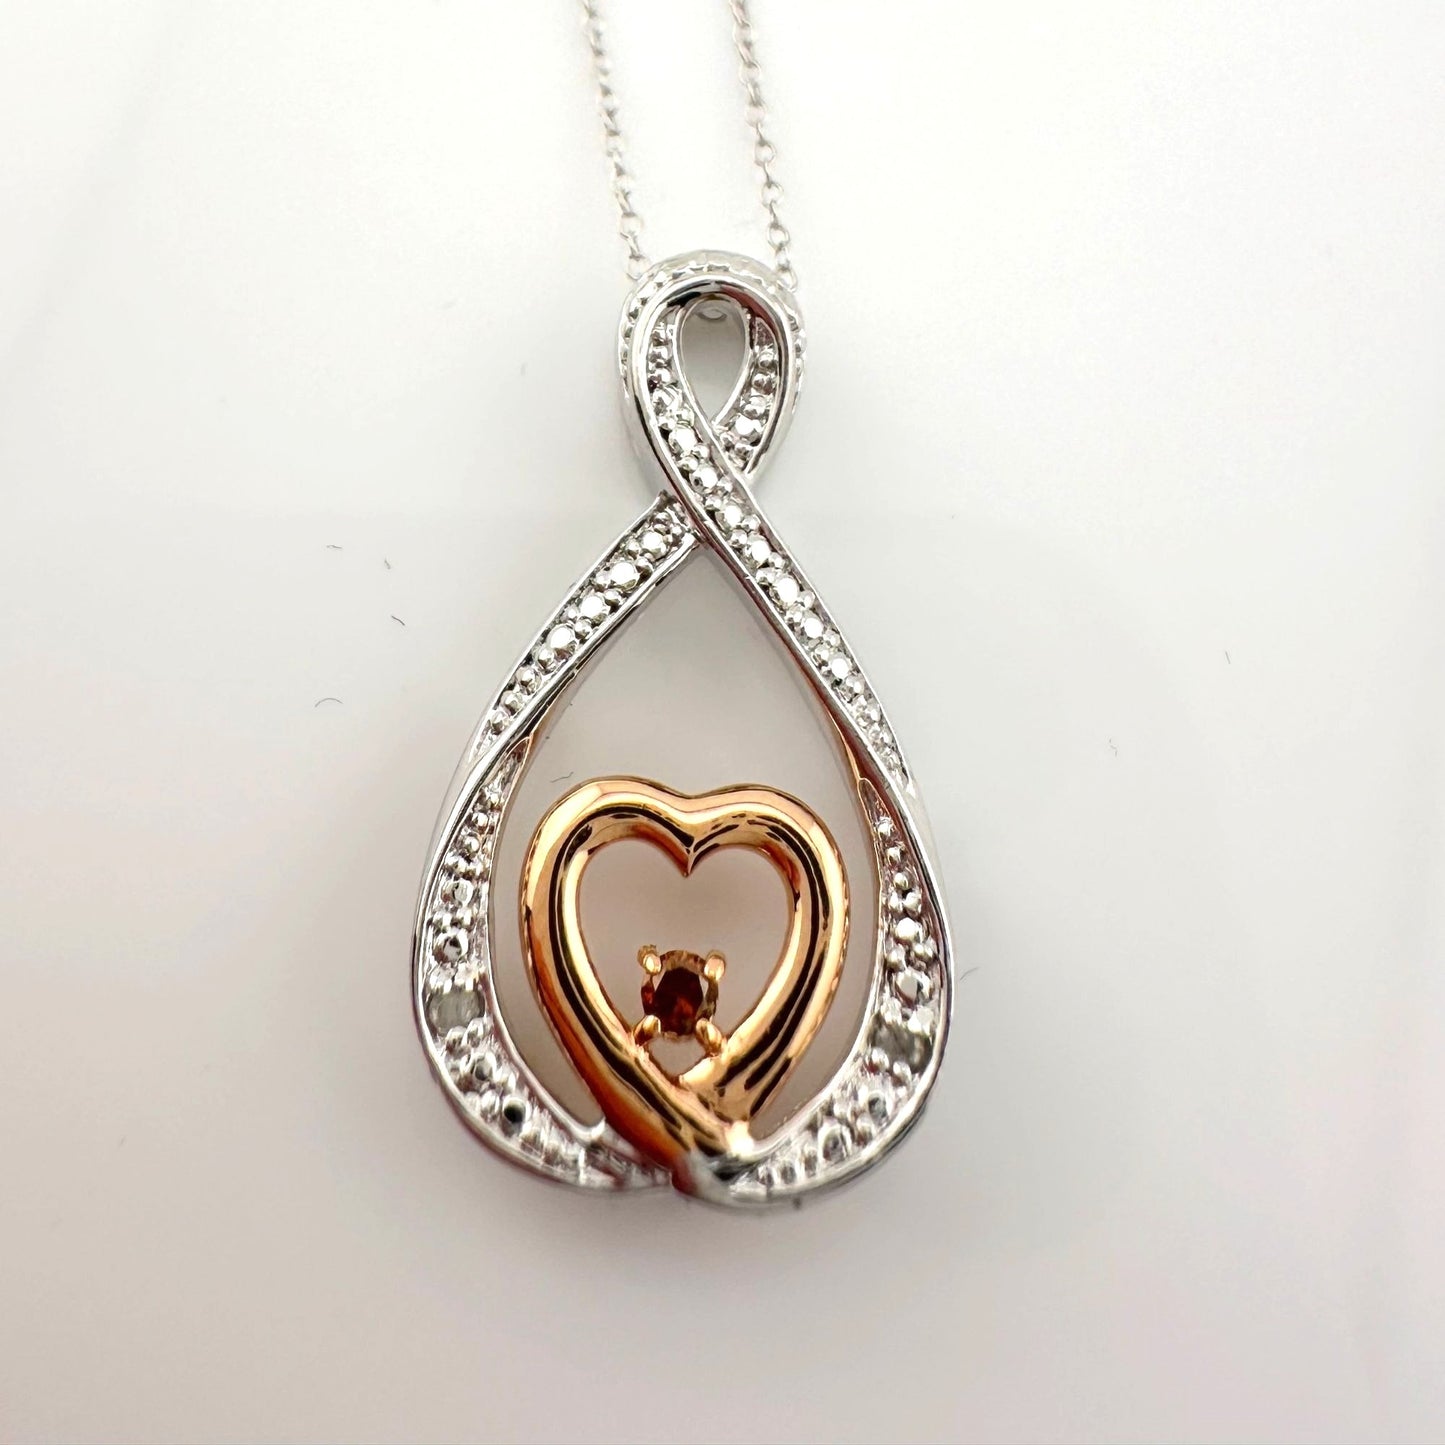 10kt Gold & Sterling Silver Infinity Heart Necklace with Natural Chocolate Diamond